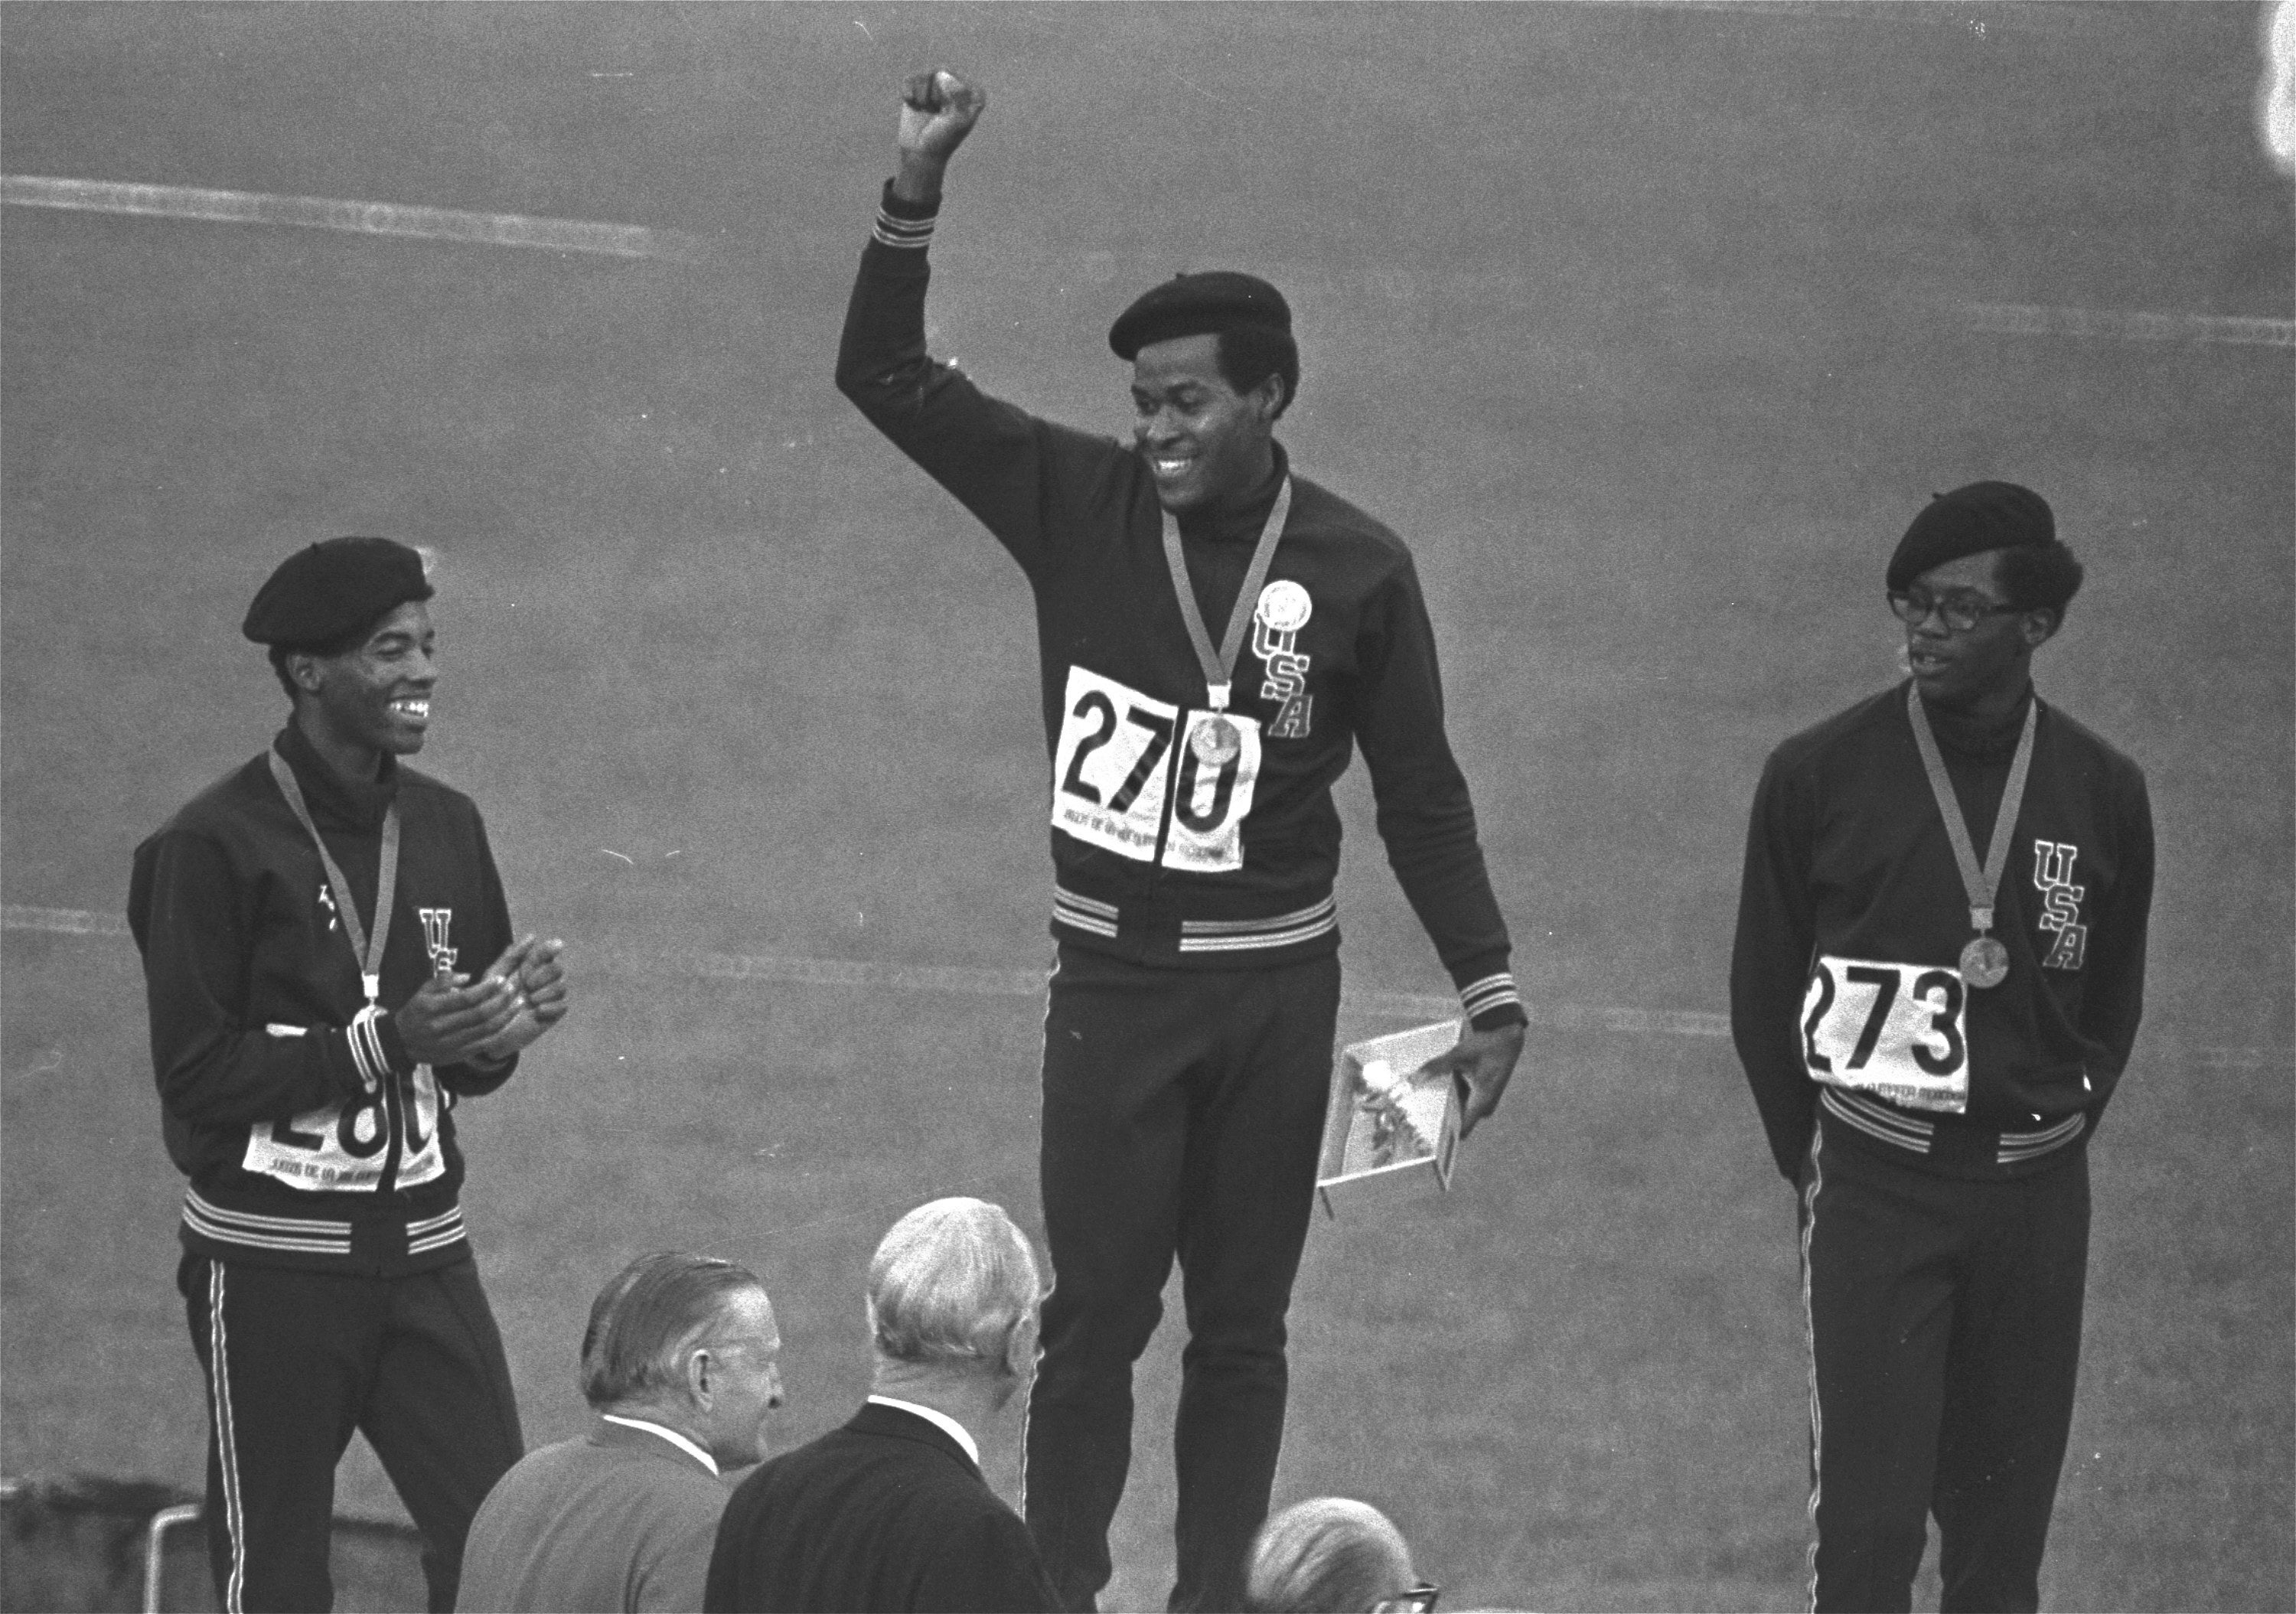 Evans (centre) receives his gold medal for the 400m race in the 1968 Olympics